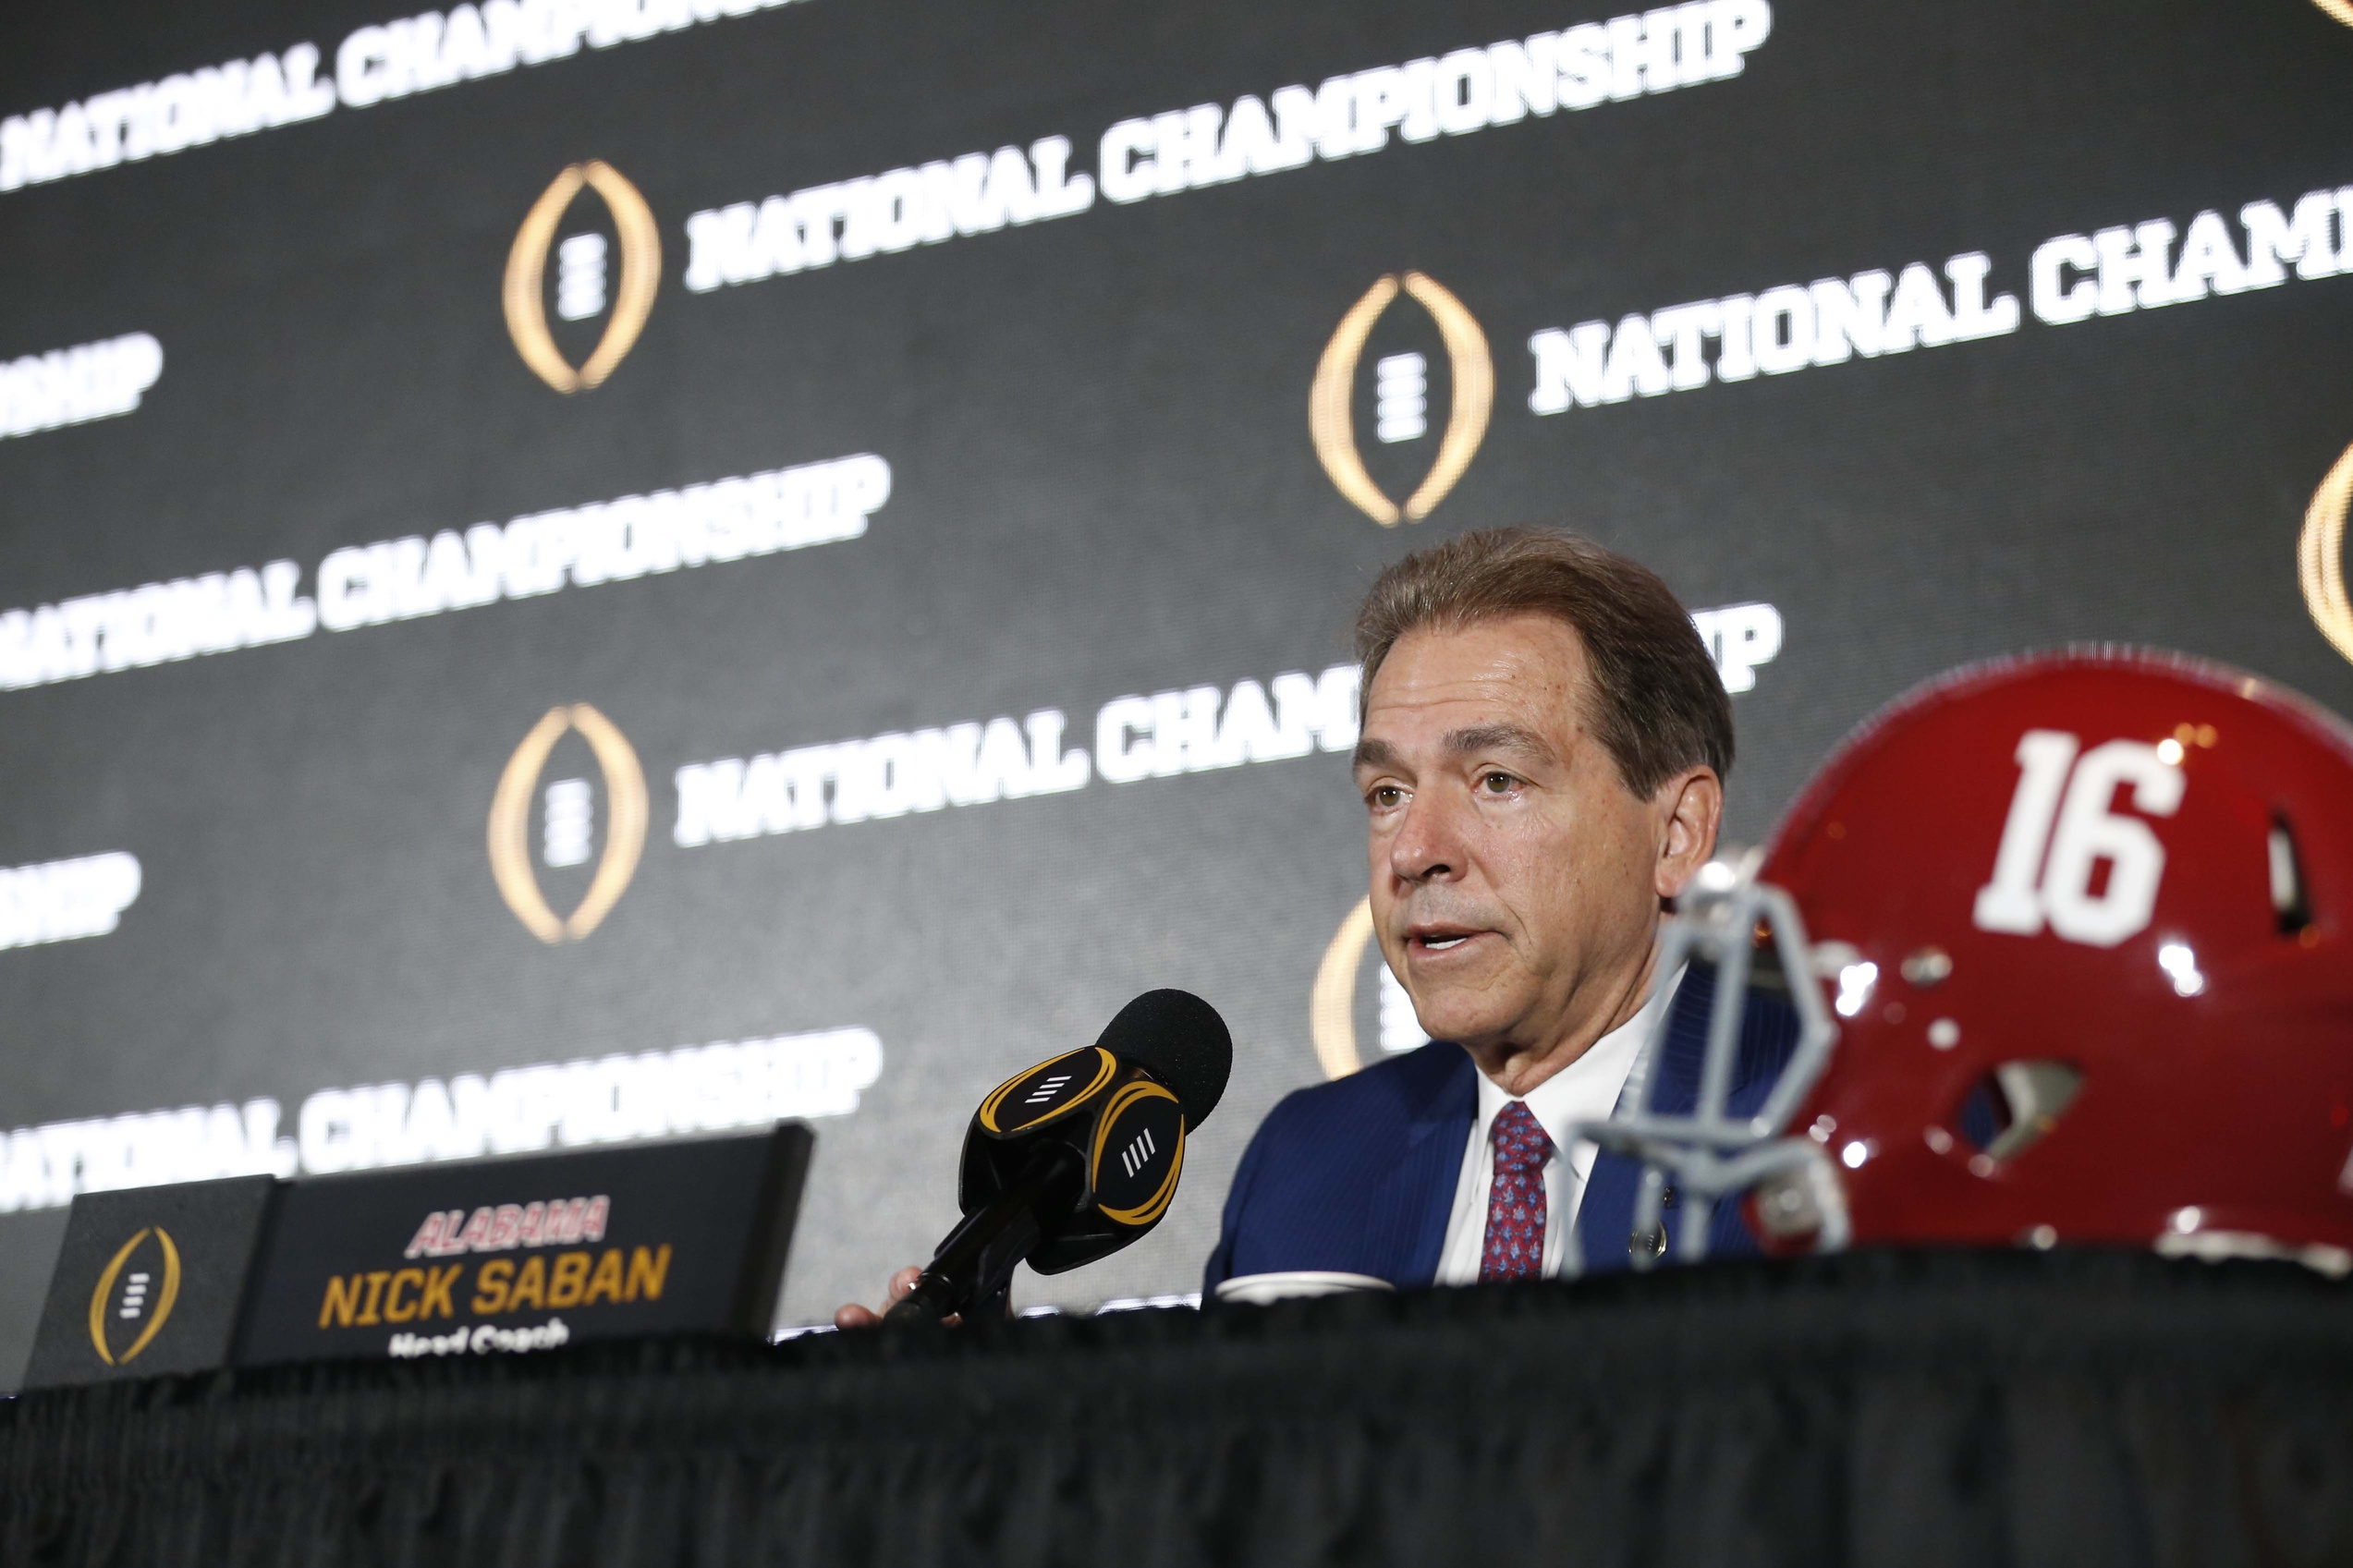 Jan 8, 2017; Tampa, FL, USA; Alabama Crimson Tide head coach Nick Saban speaks to media during the head coaches news conference at the Tampa Convention Center. Mandatory Credit: Kim Klement-USA TODAY Sports